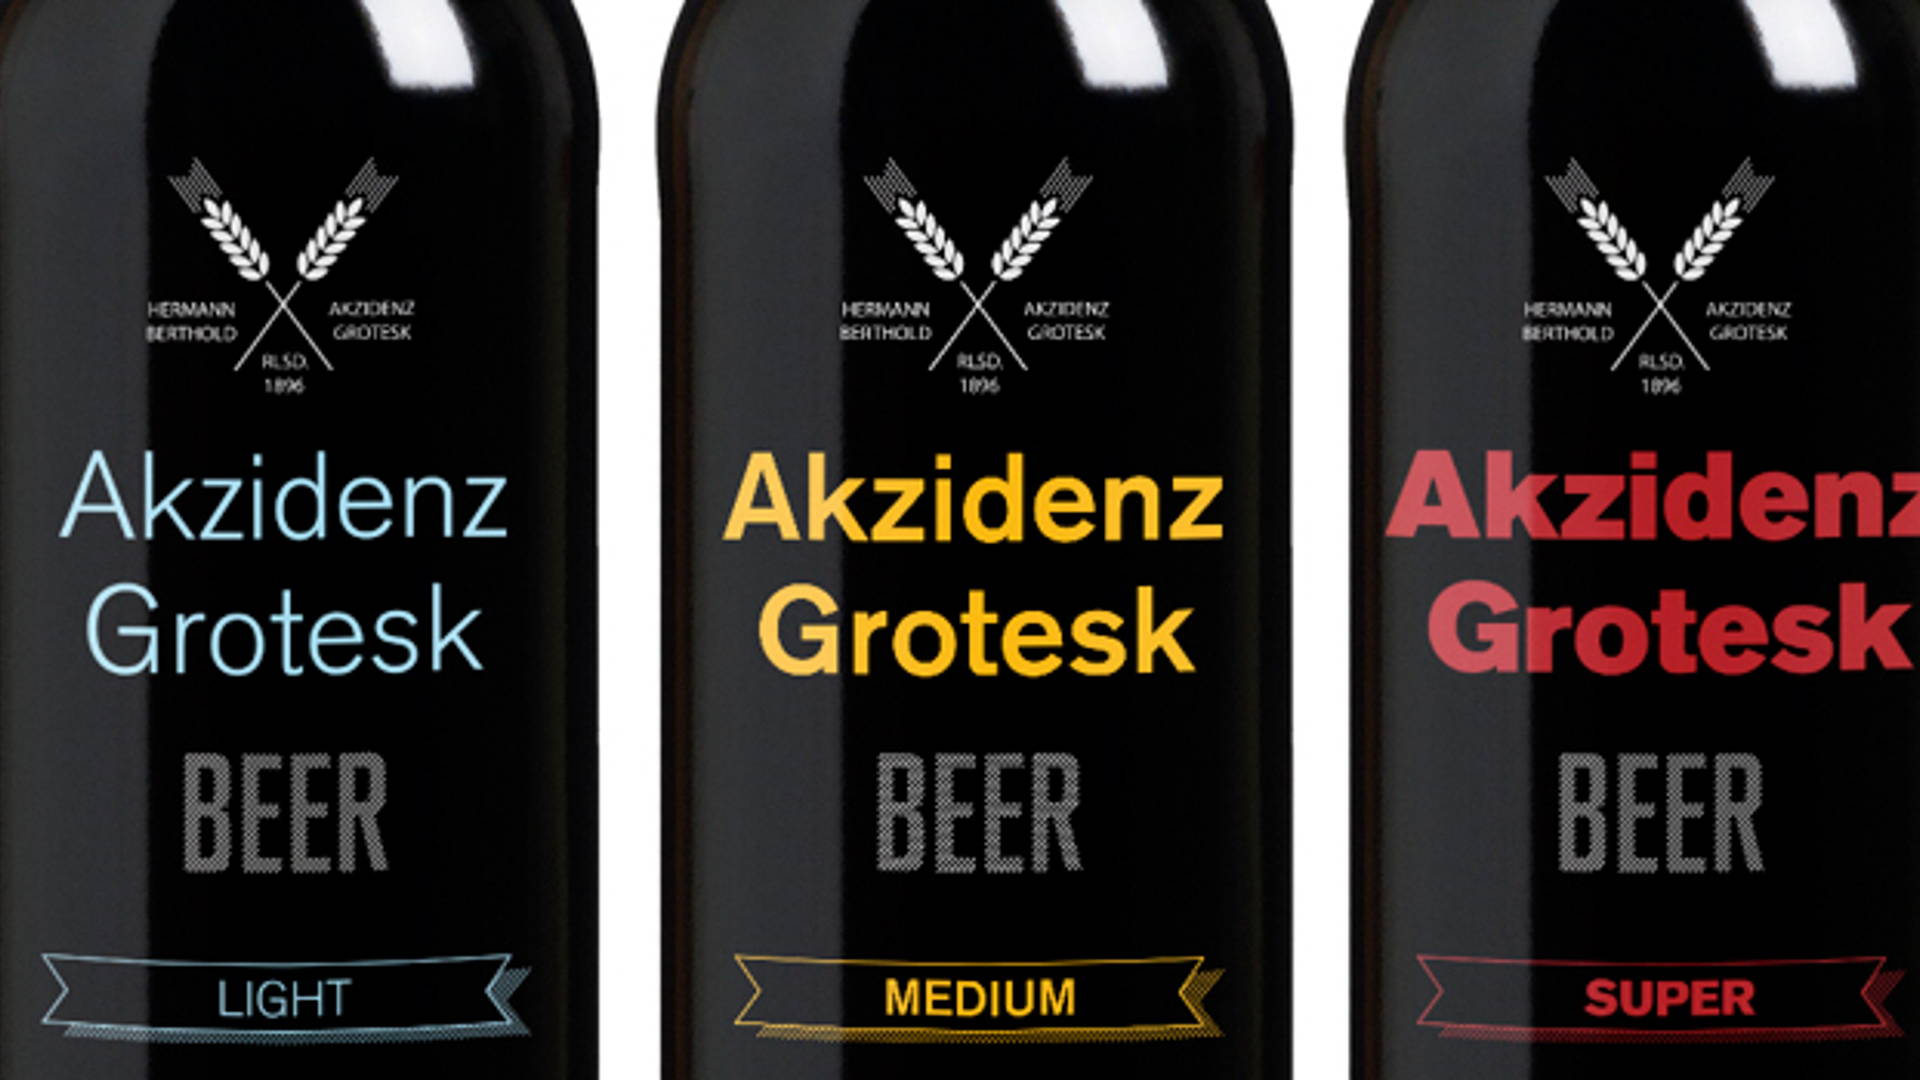 Featured image for Student Spotlight: Akzidenz Grostesk Beer